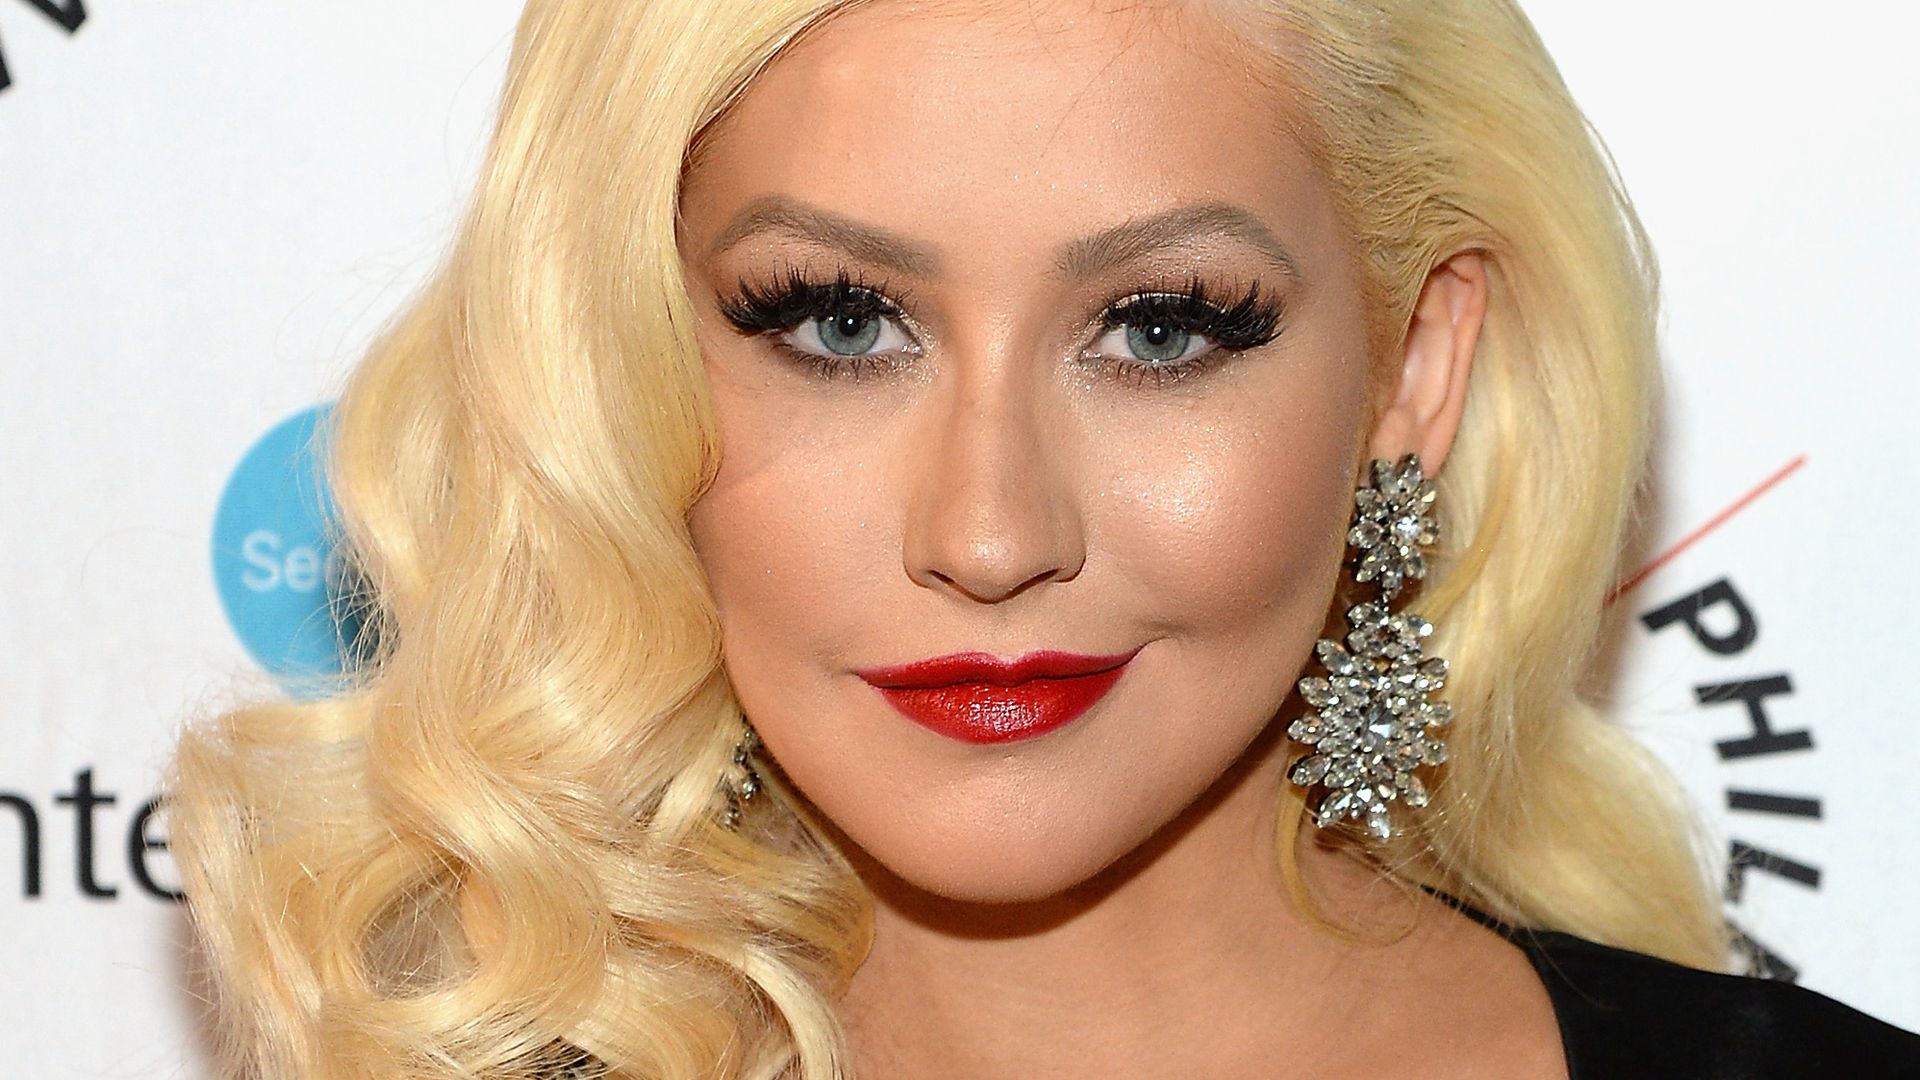 Christina Aguilera dazzles in 'hot' new selfie - stunned fans notice ...